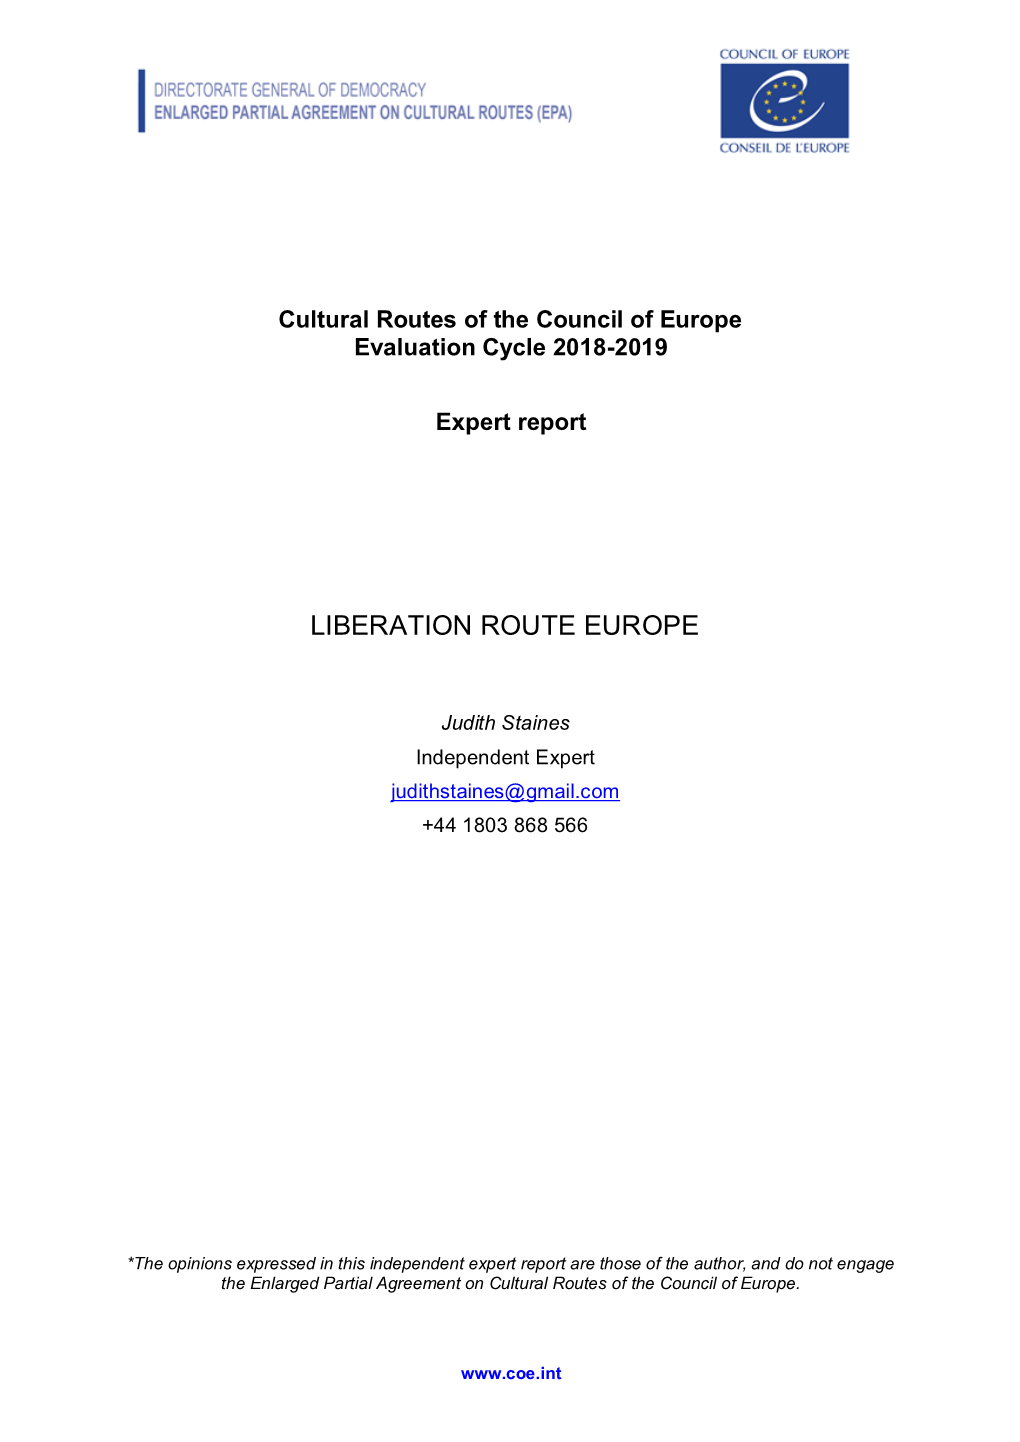 Liberation Route Europe